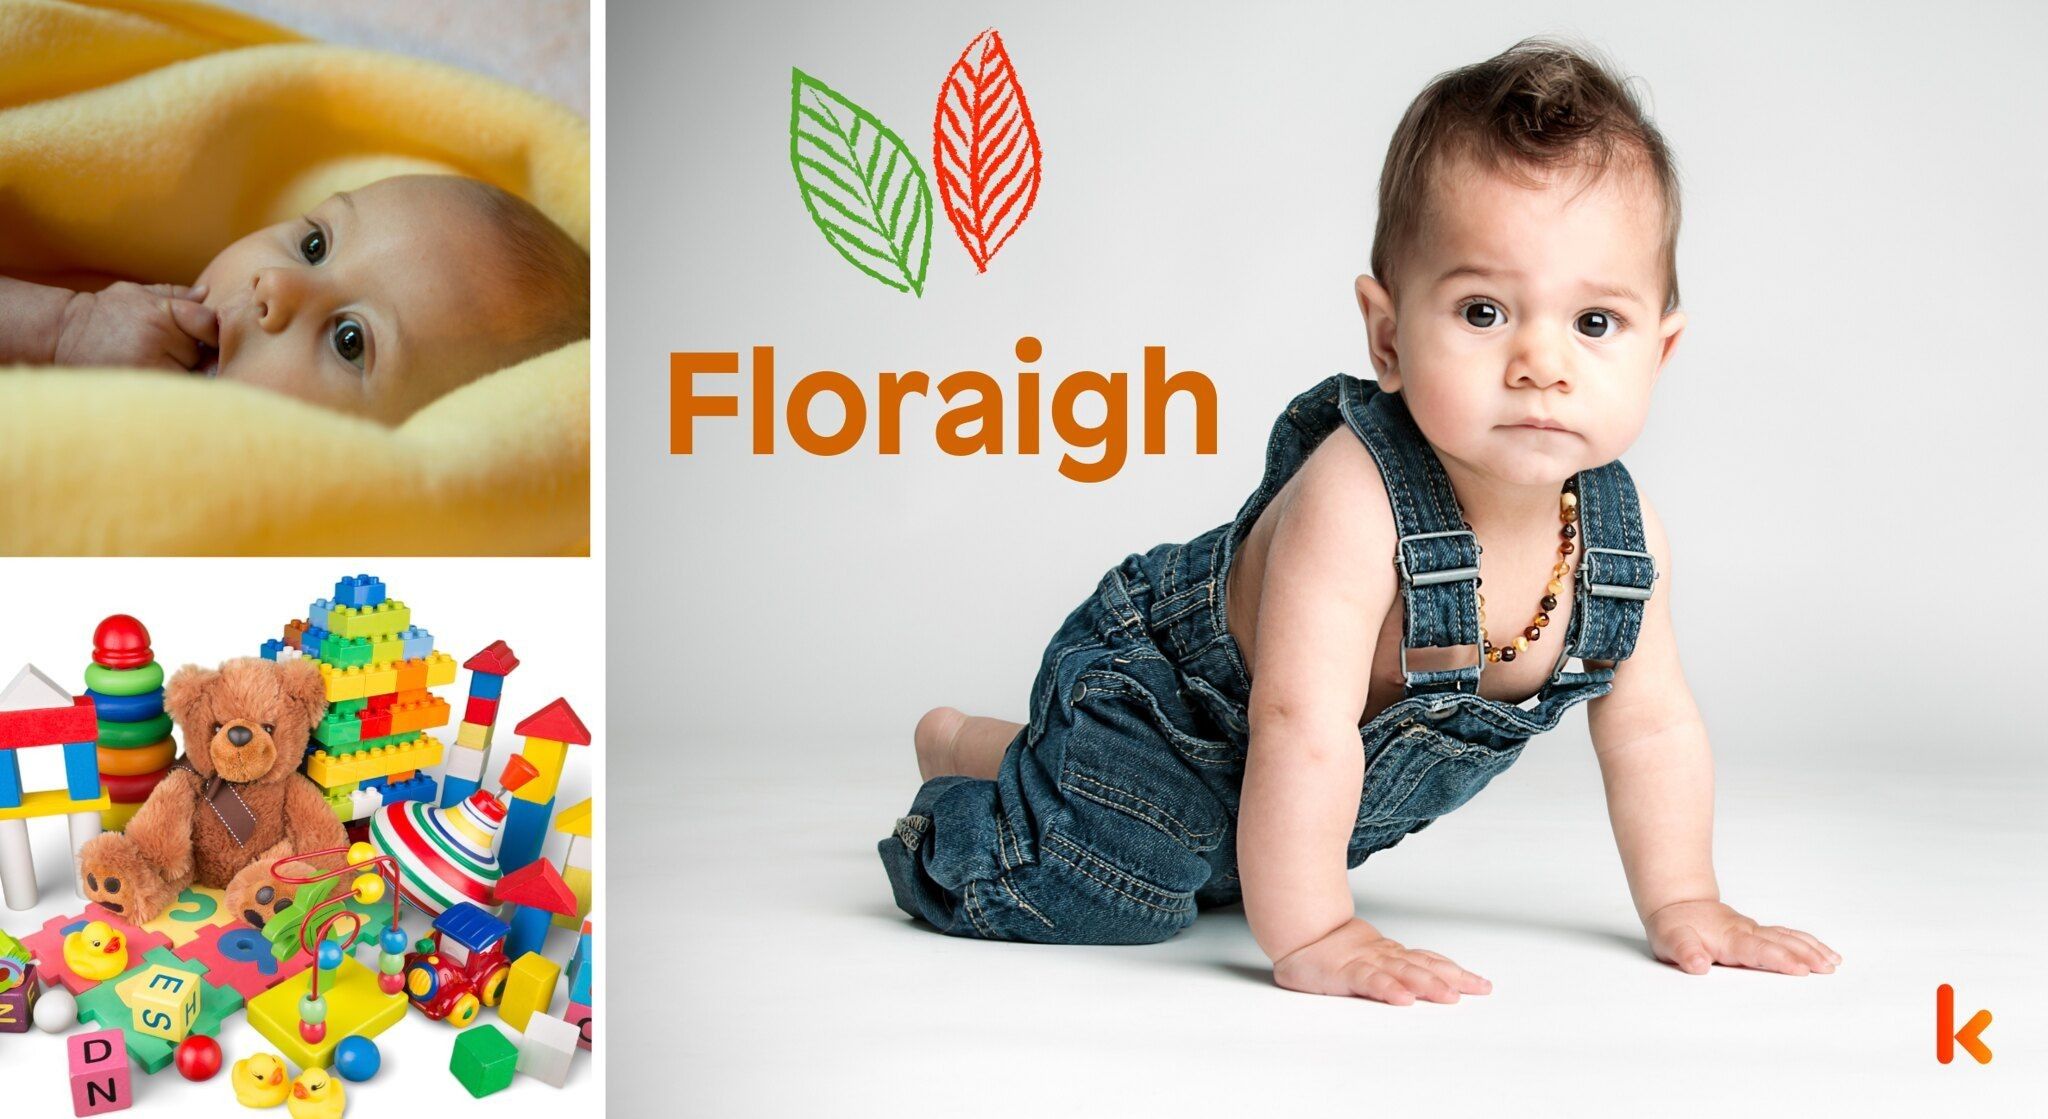 Meaning of the name Floraigh